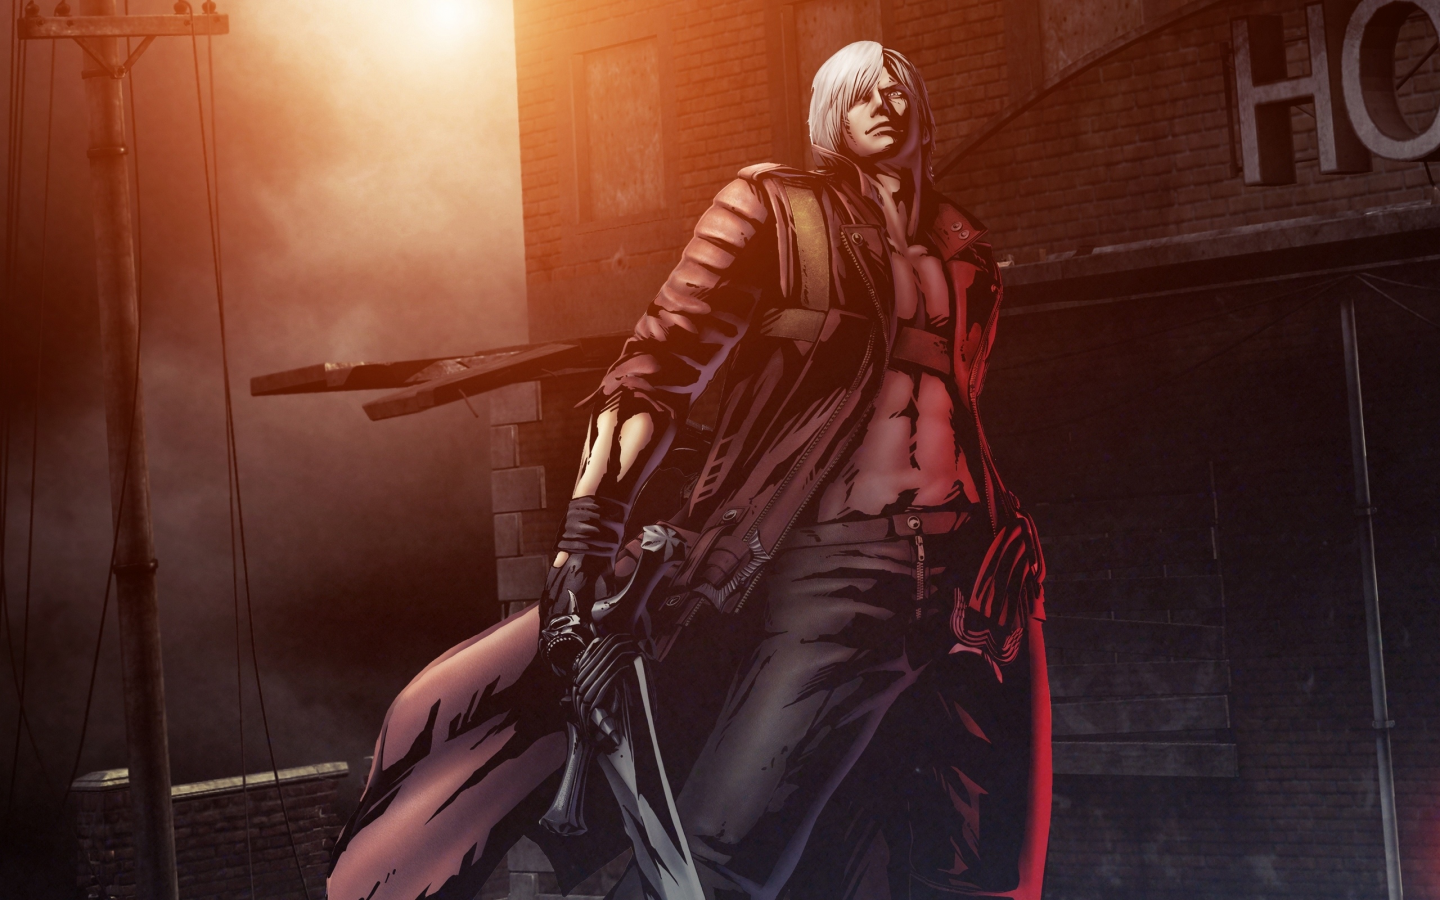 dante, sword, fate of two worlds, Devil may cry, game wallpapers, marvel vs capcom 3, guns, dmc